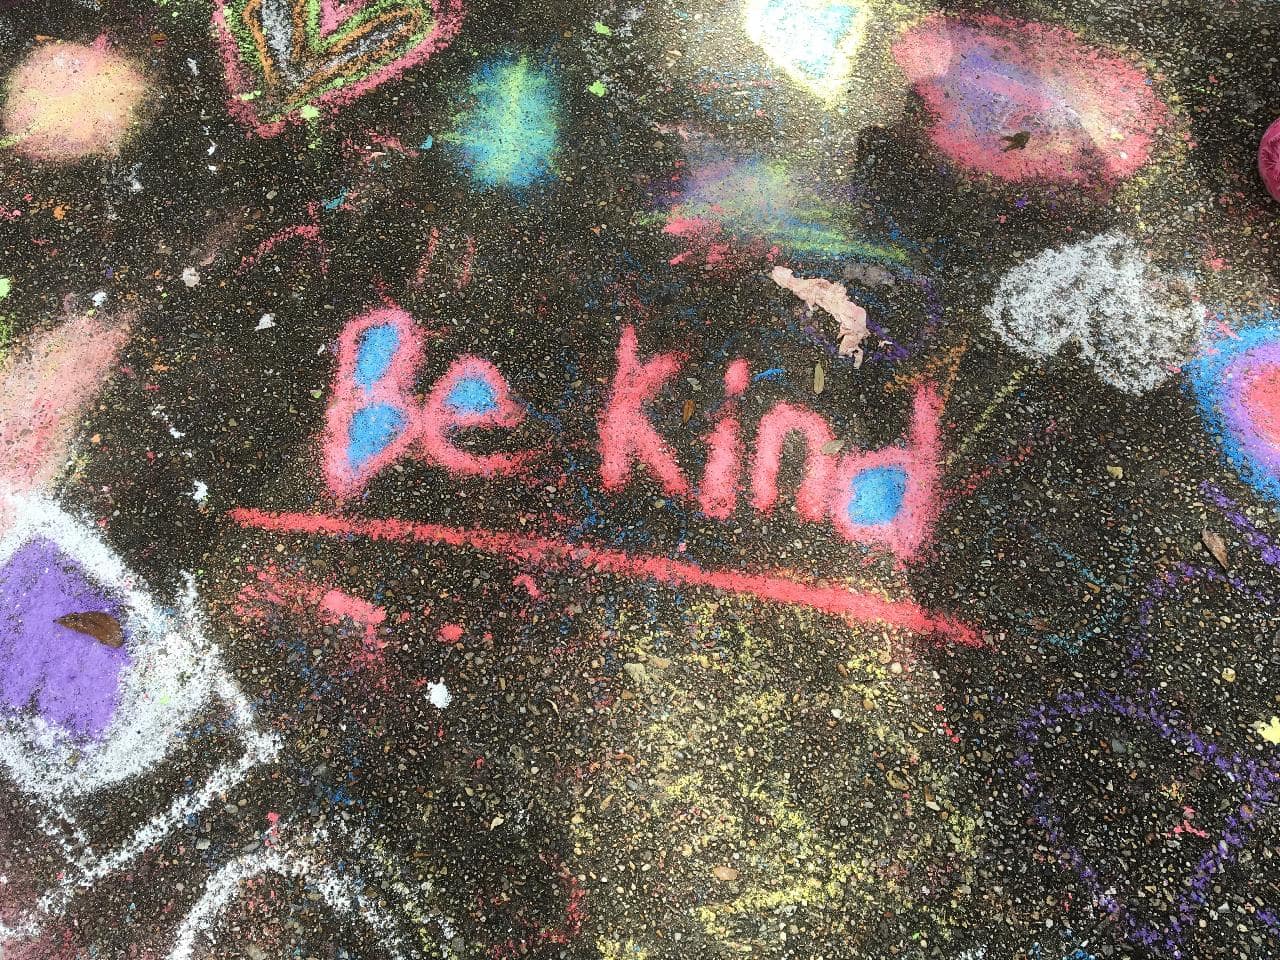 Encouragement to be kind and loving.